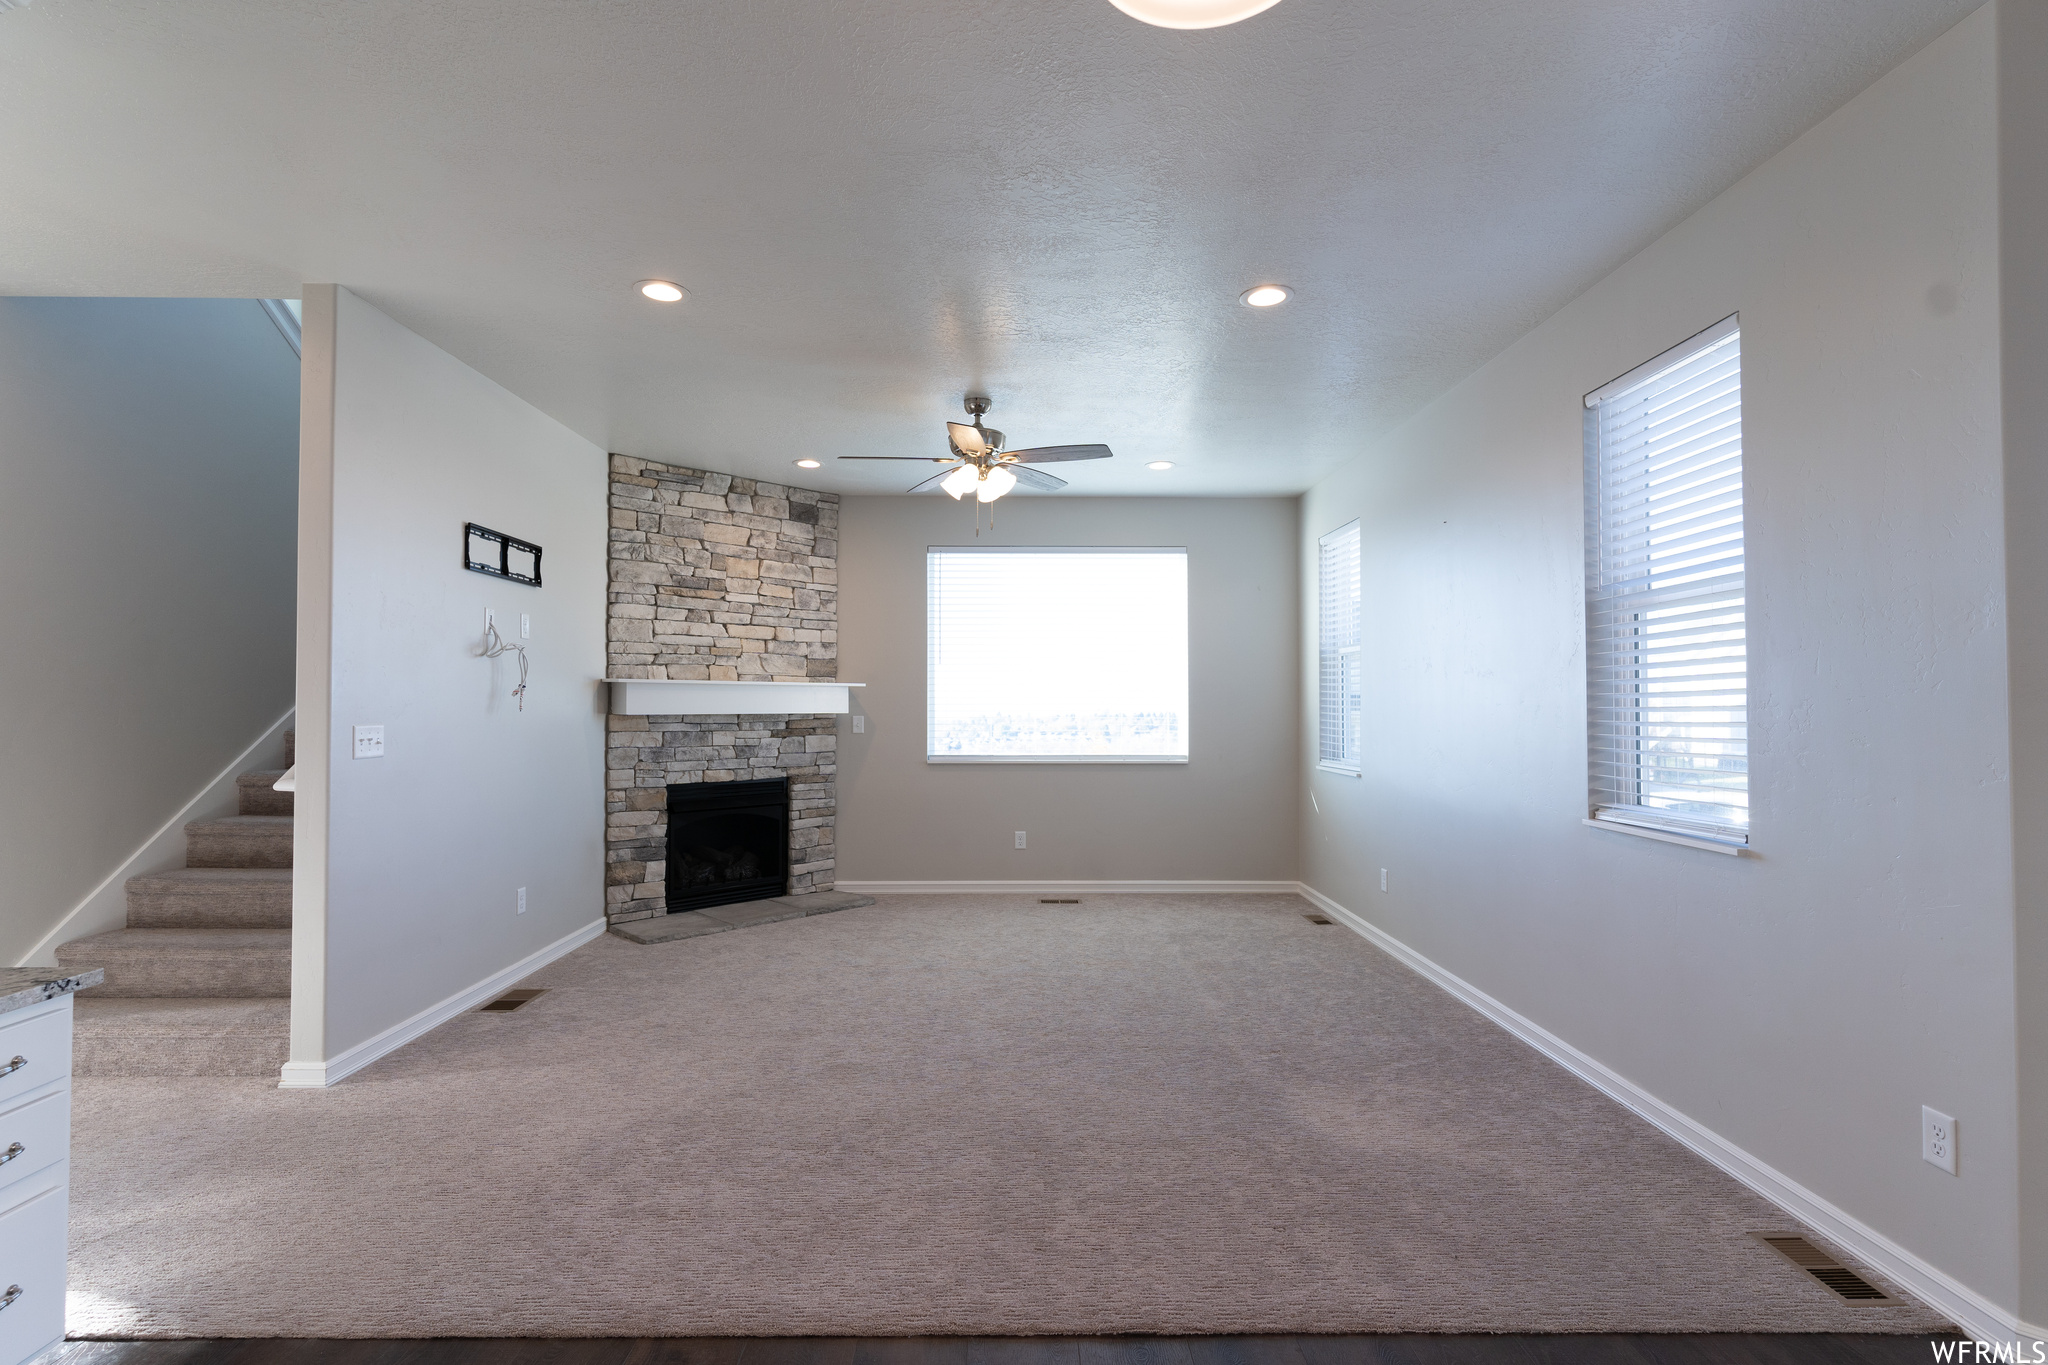 Unfurnished living room featuring ceiling fan, a fireplace, plenty of natural light, and light carpet